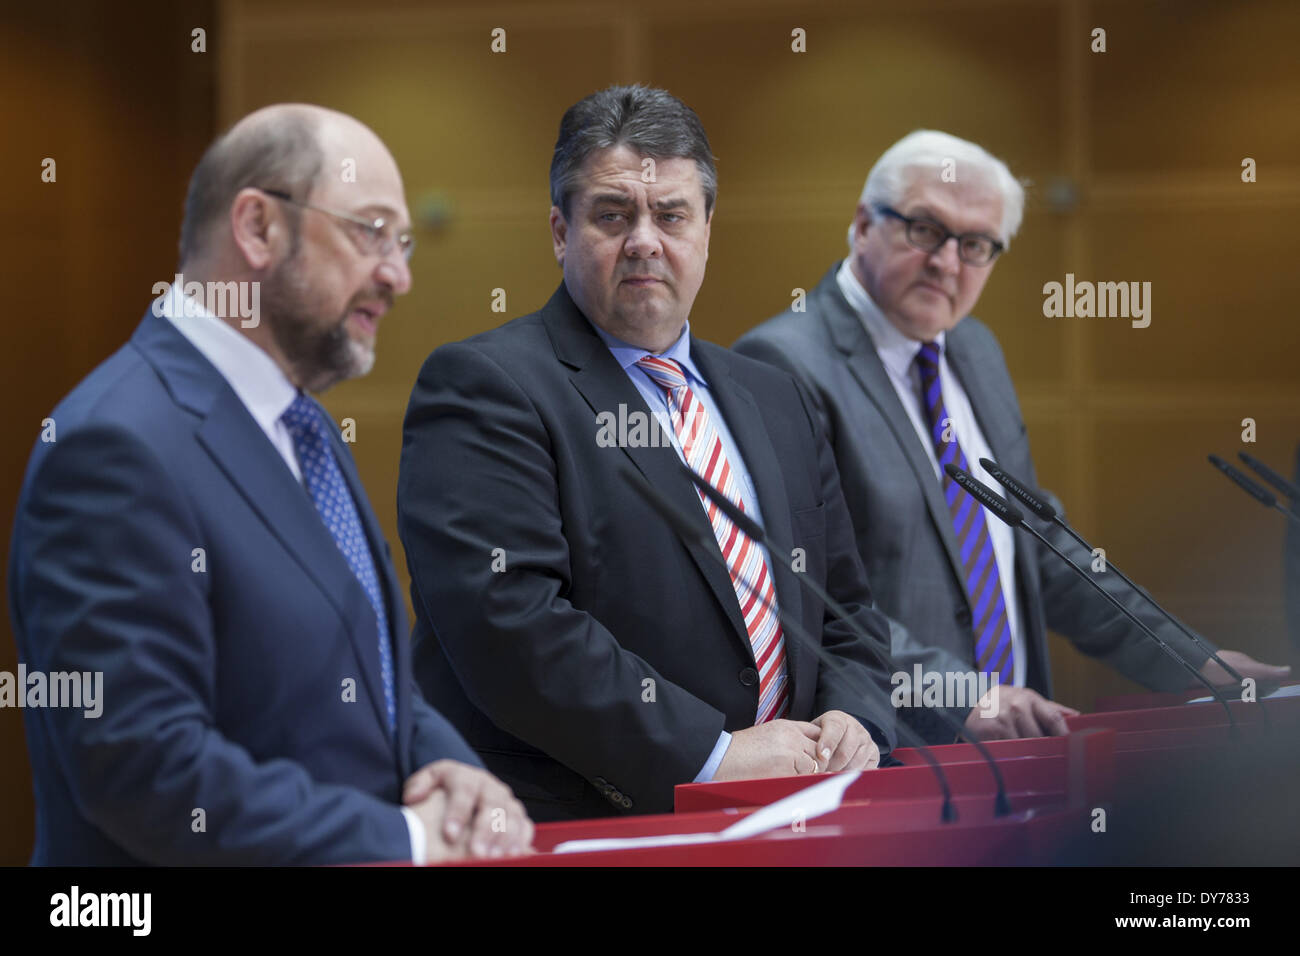 Berlin, Germany. 7th Apr, 2014. Joint press conference after the meeting of the SPD party executive with the party leader of SPD Sigmar Gabriel, the common top candidate of the European social democrats for the European election Martin Schulz and as well the Minister of Foreign Affairs Frank-Walter Steinmeier at Willy Brandt-Haus in Berlin./Picture: Sigmar Gabriel (SPD), SPD Party Chef and German Minister of Economy and Energy, and candidate of the European social democrats for the European election Martin Schulz, and Frank-Walter Steinmeier (SPD), German Foreign Minister. (Photo by Reynal Stock Photo